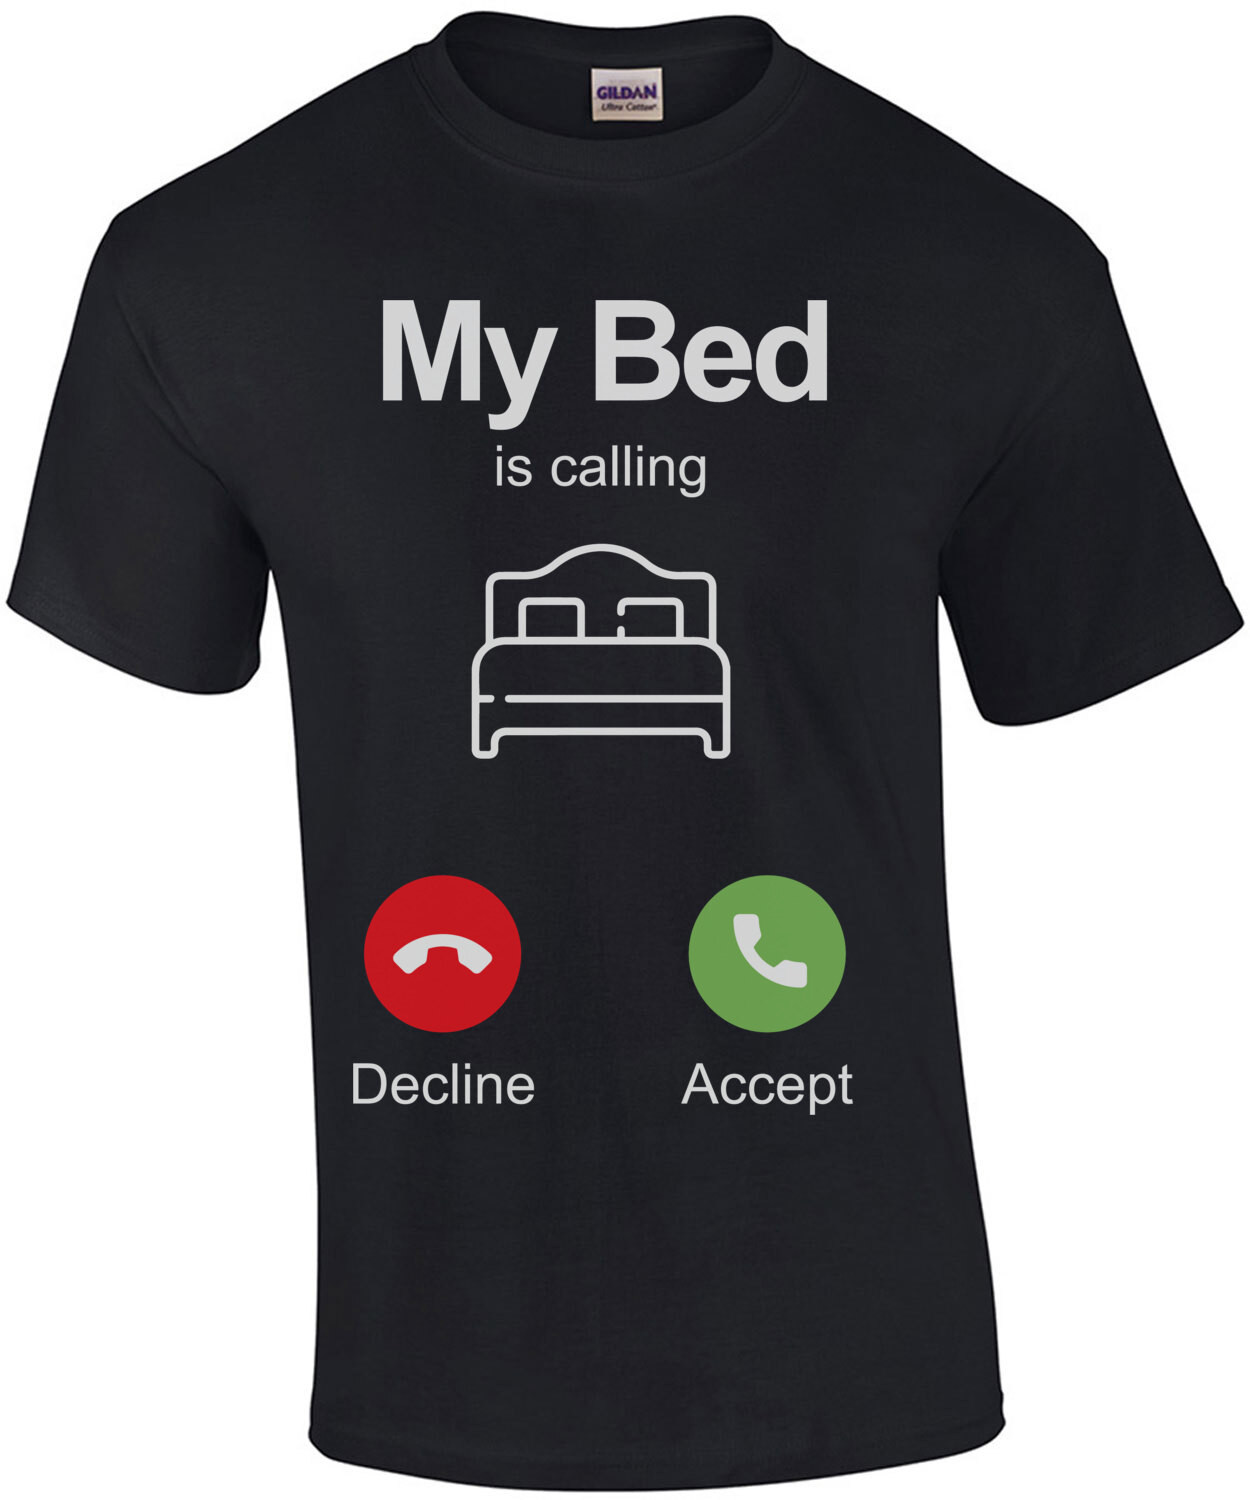 My bed is calling - decline accept - funny t-shirt